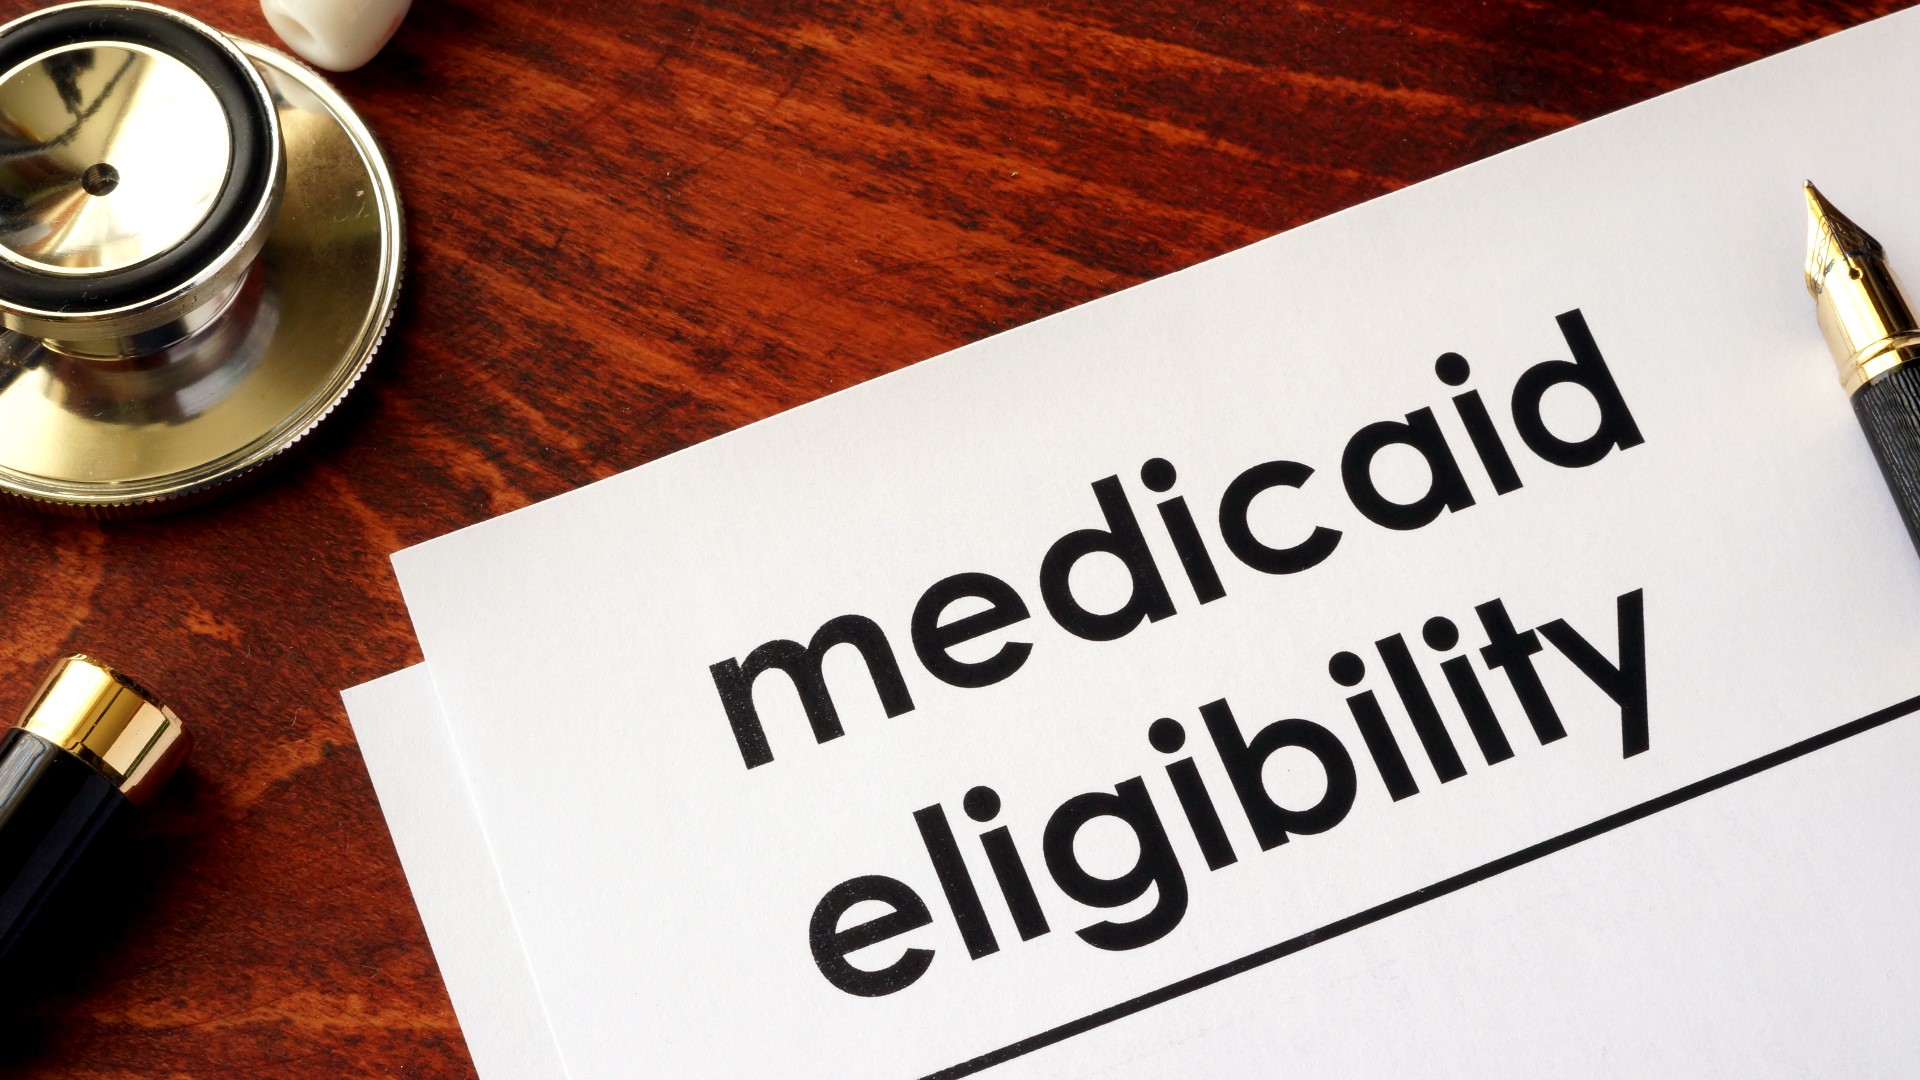 People on Medicaid should make sure their contact info is up to date on their accounts and check the mail frequently to keep an eye on their eligibility status.